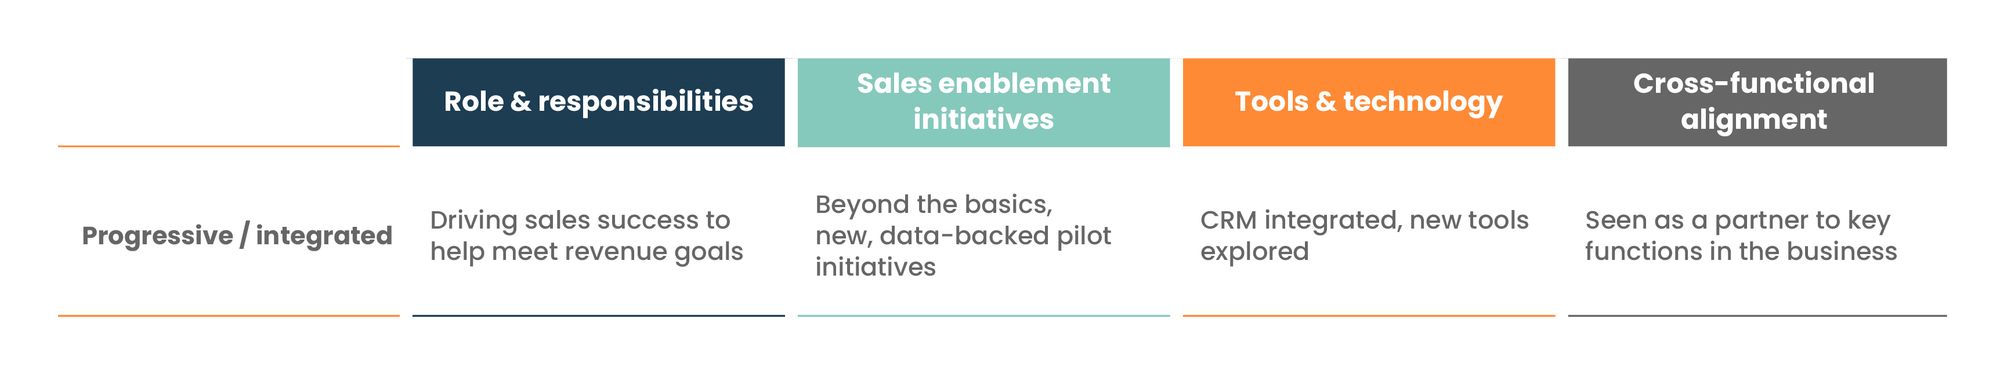 Progressive / integrated sales enablement maturity stage